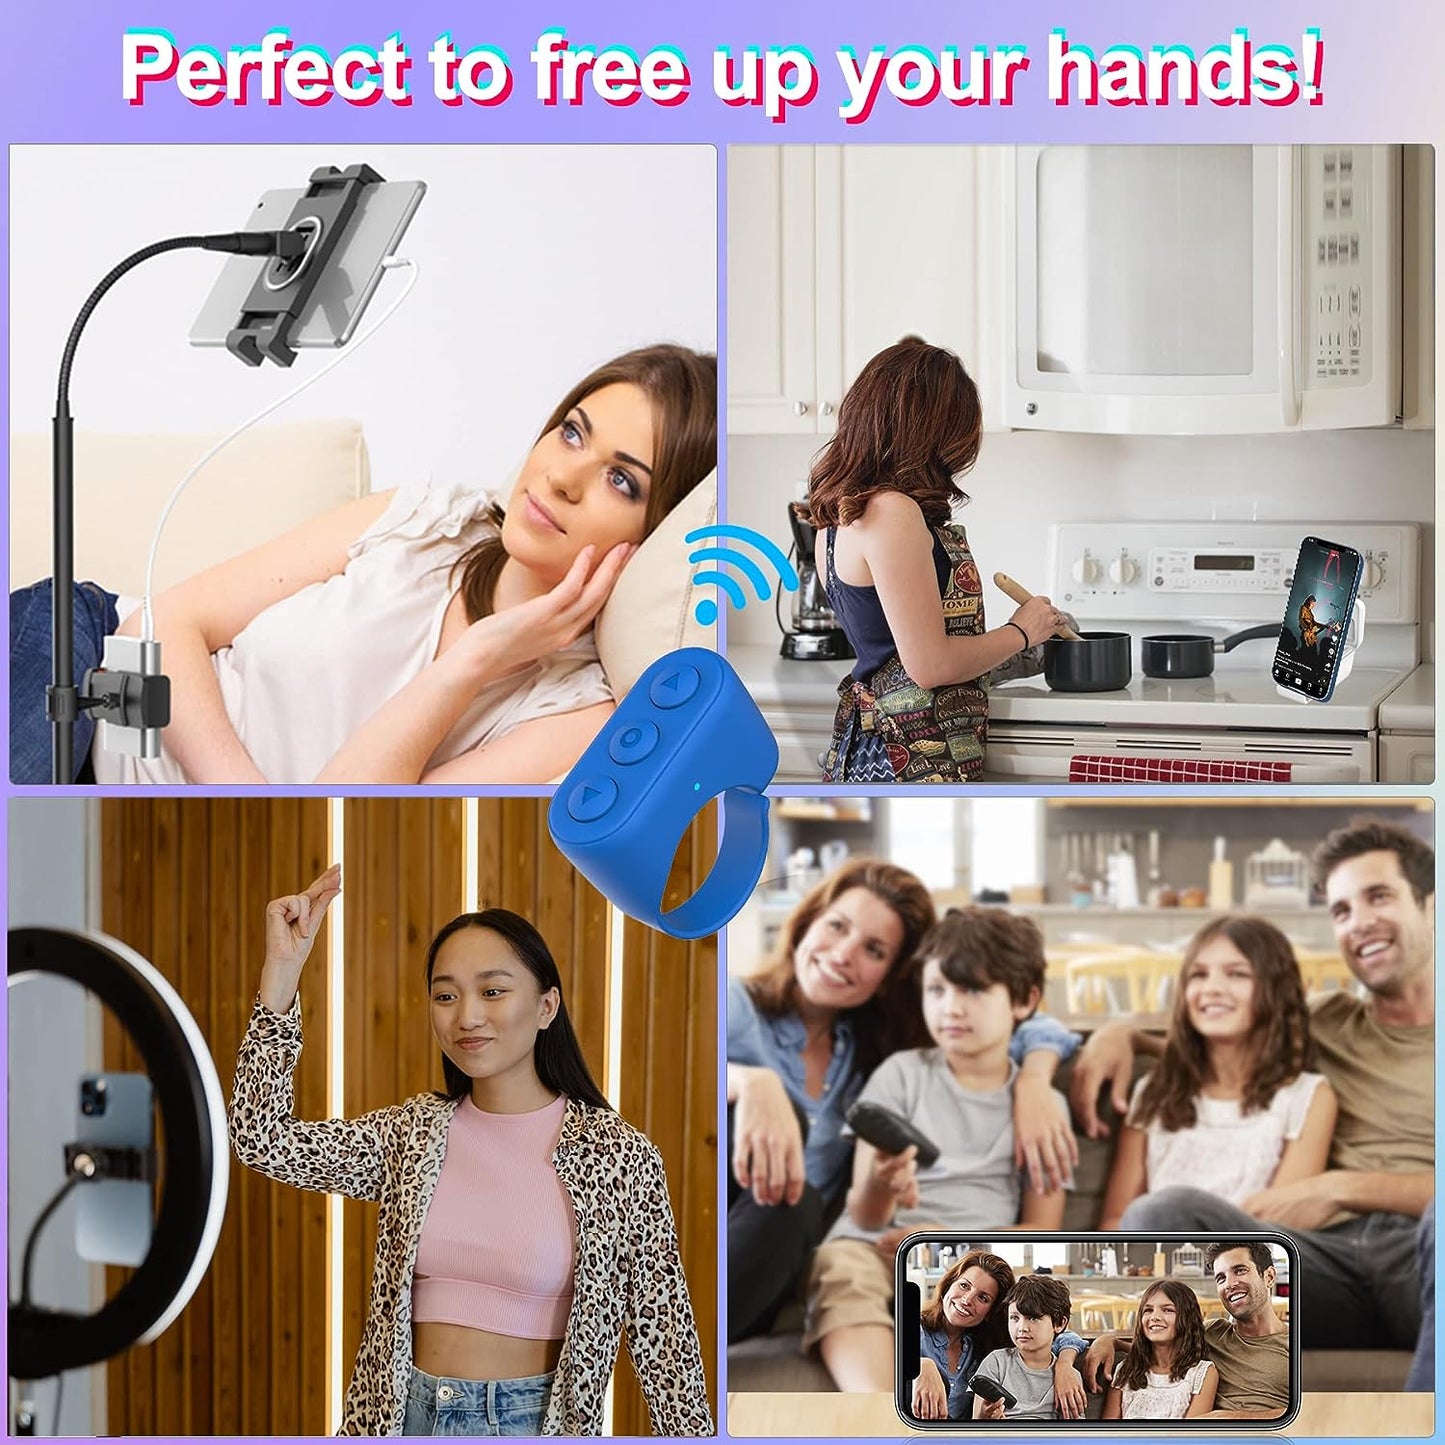 Majestic, Upgrade TIK Tok Bluetooth Remote Control Page Turner, 3 in 1 Function Video Scrolling Ring and Camera Shutter Remote and Phone Holder, Compatible with iPhone iPad Android Cell Phone-Blue